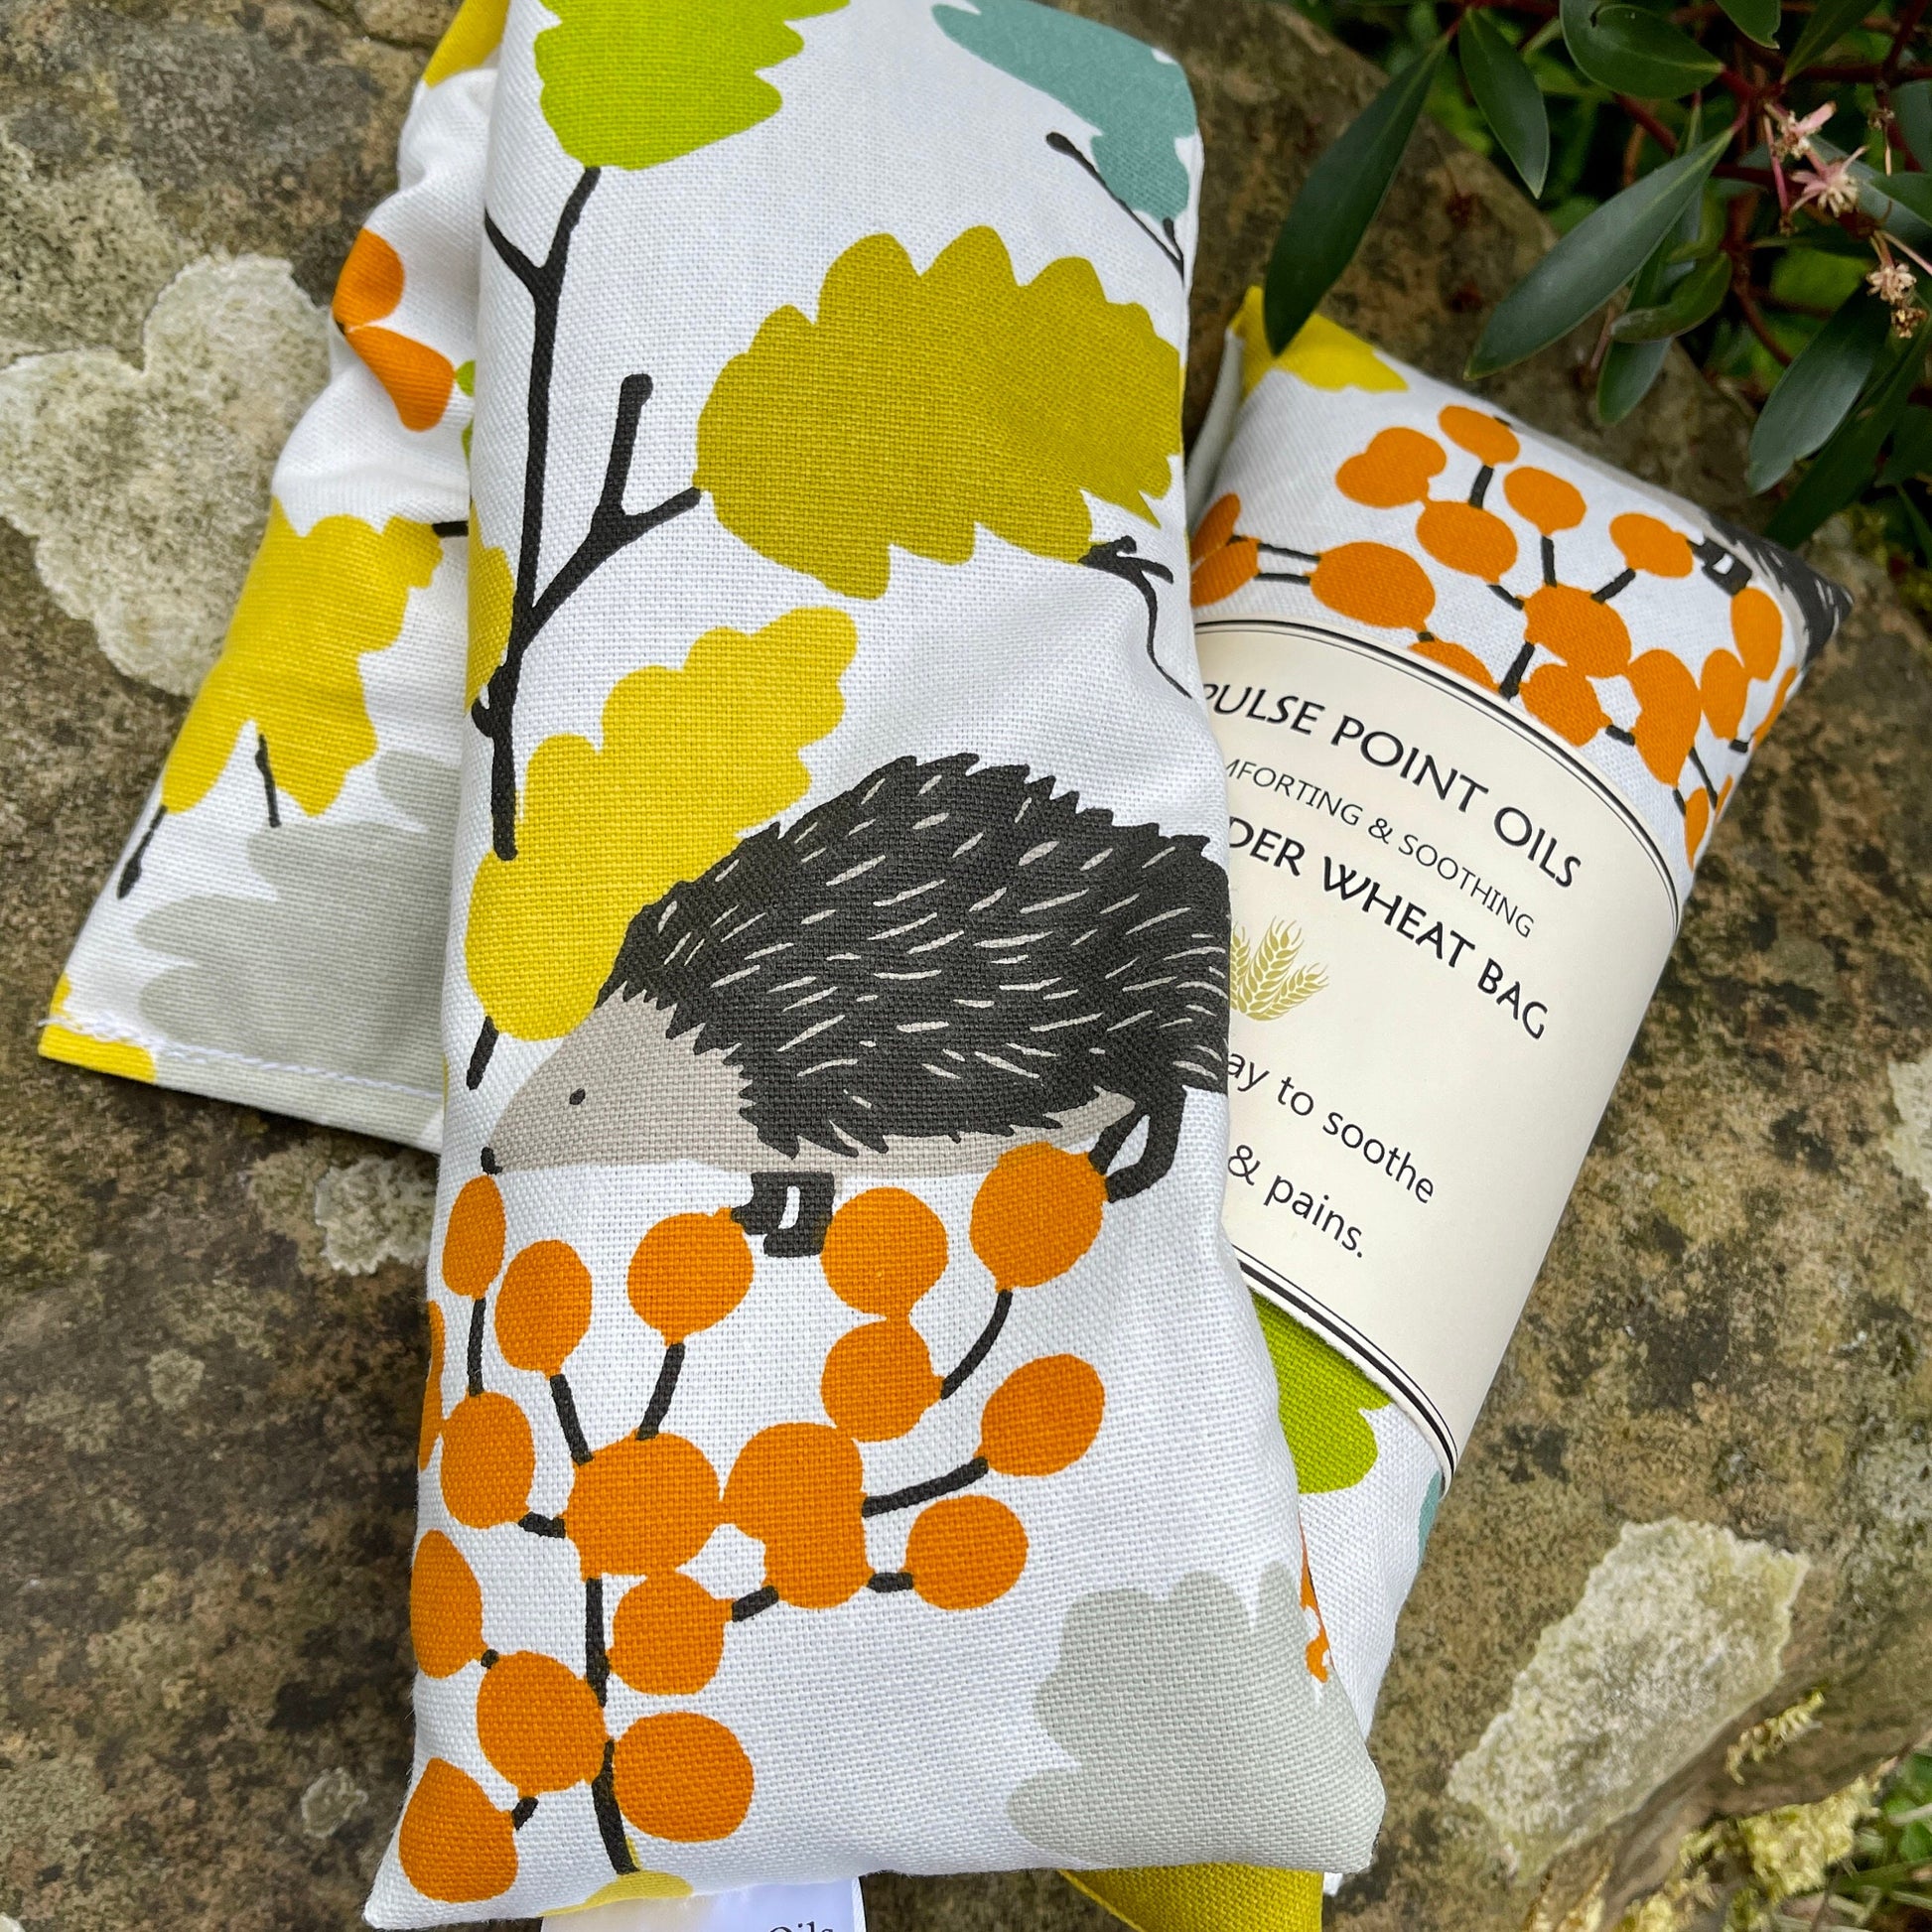 Bright cheery wheat bag in a hedgehog cotton print for aches and pains, comfort and relaxation.